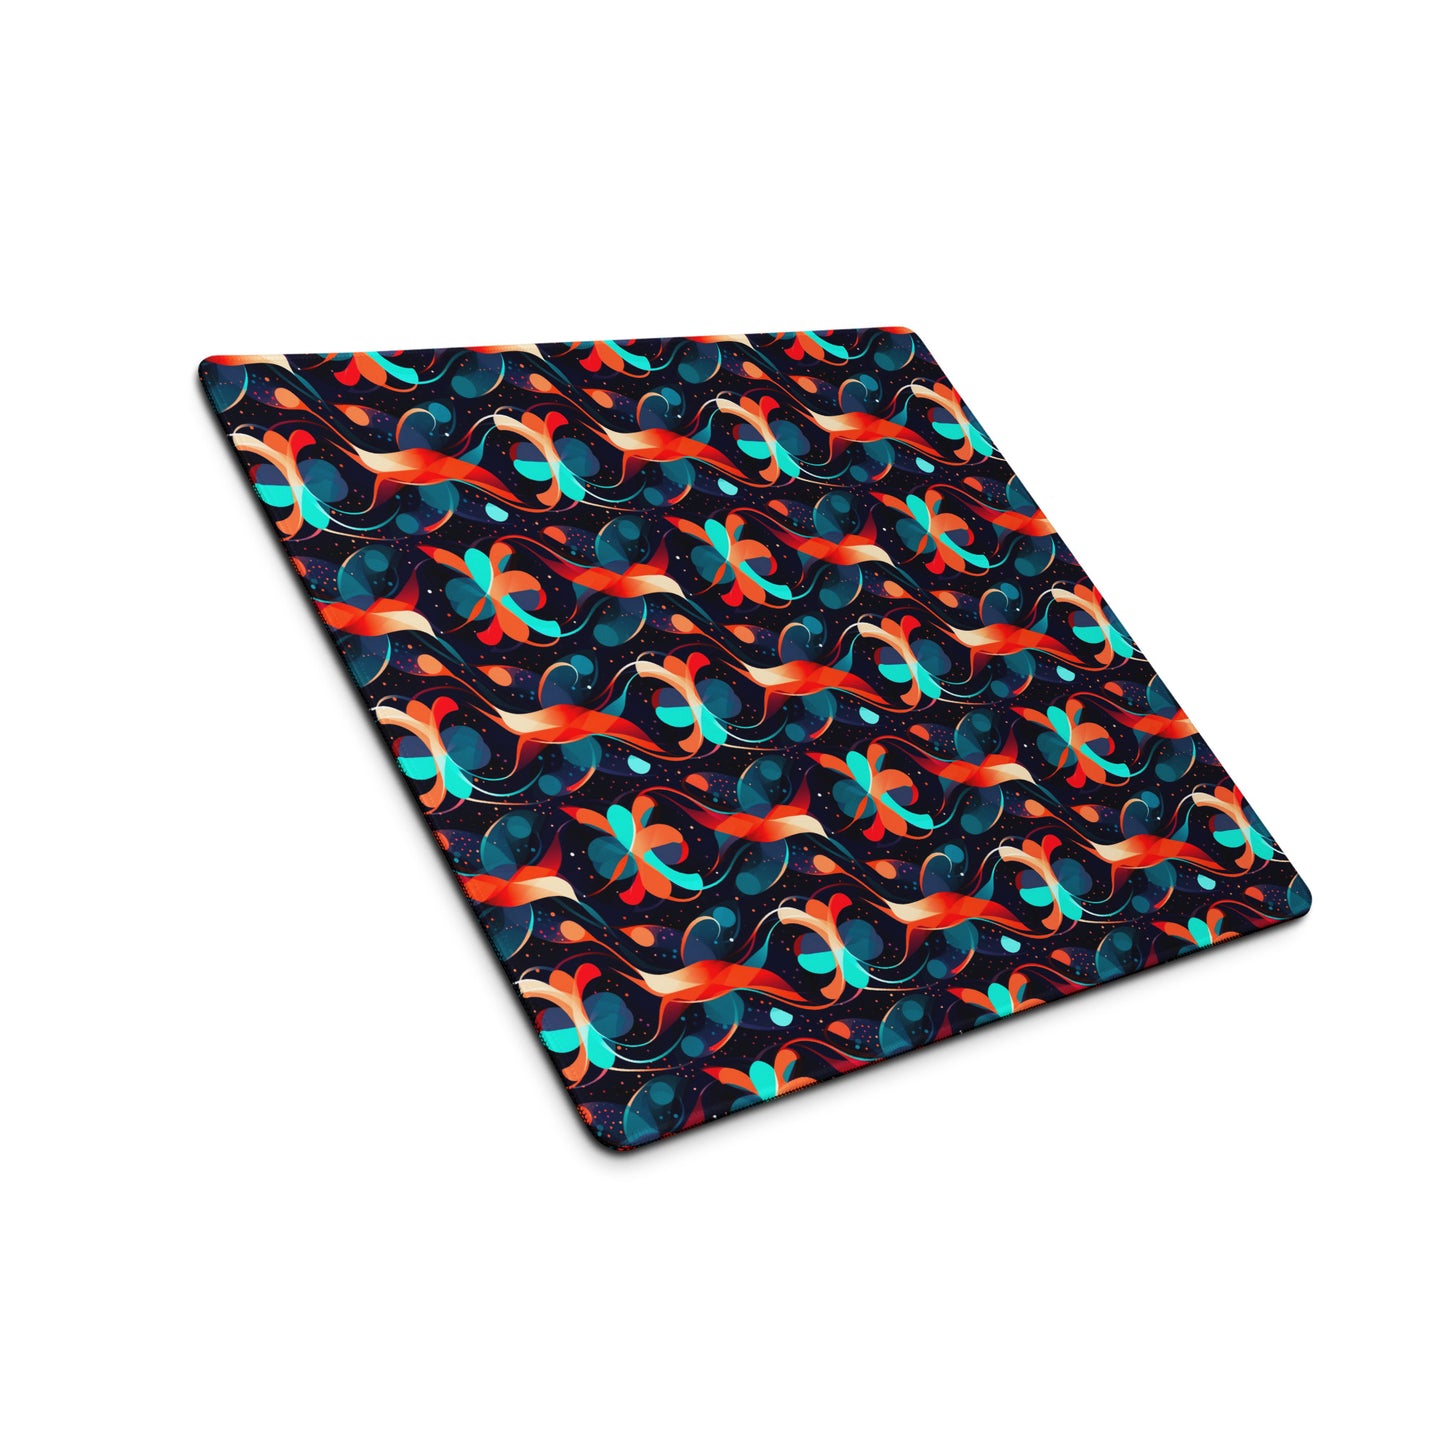 A 18" x 16" desk pad with a wavy orange and blue pattern sitting at an angle.